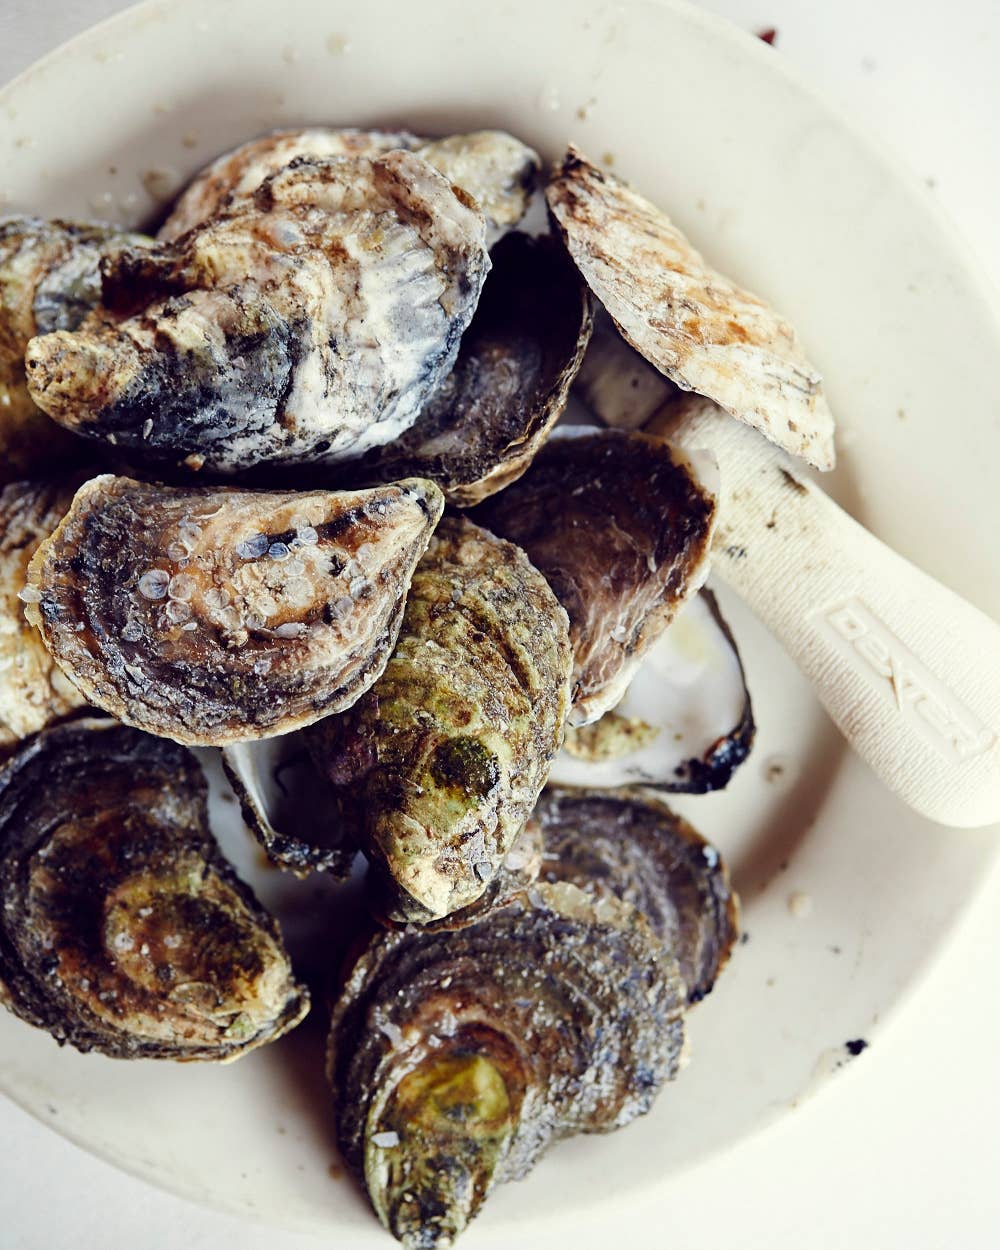 VIDEO: Maine’s Pemaquid Oyster Company